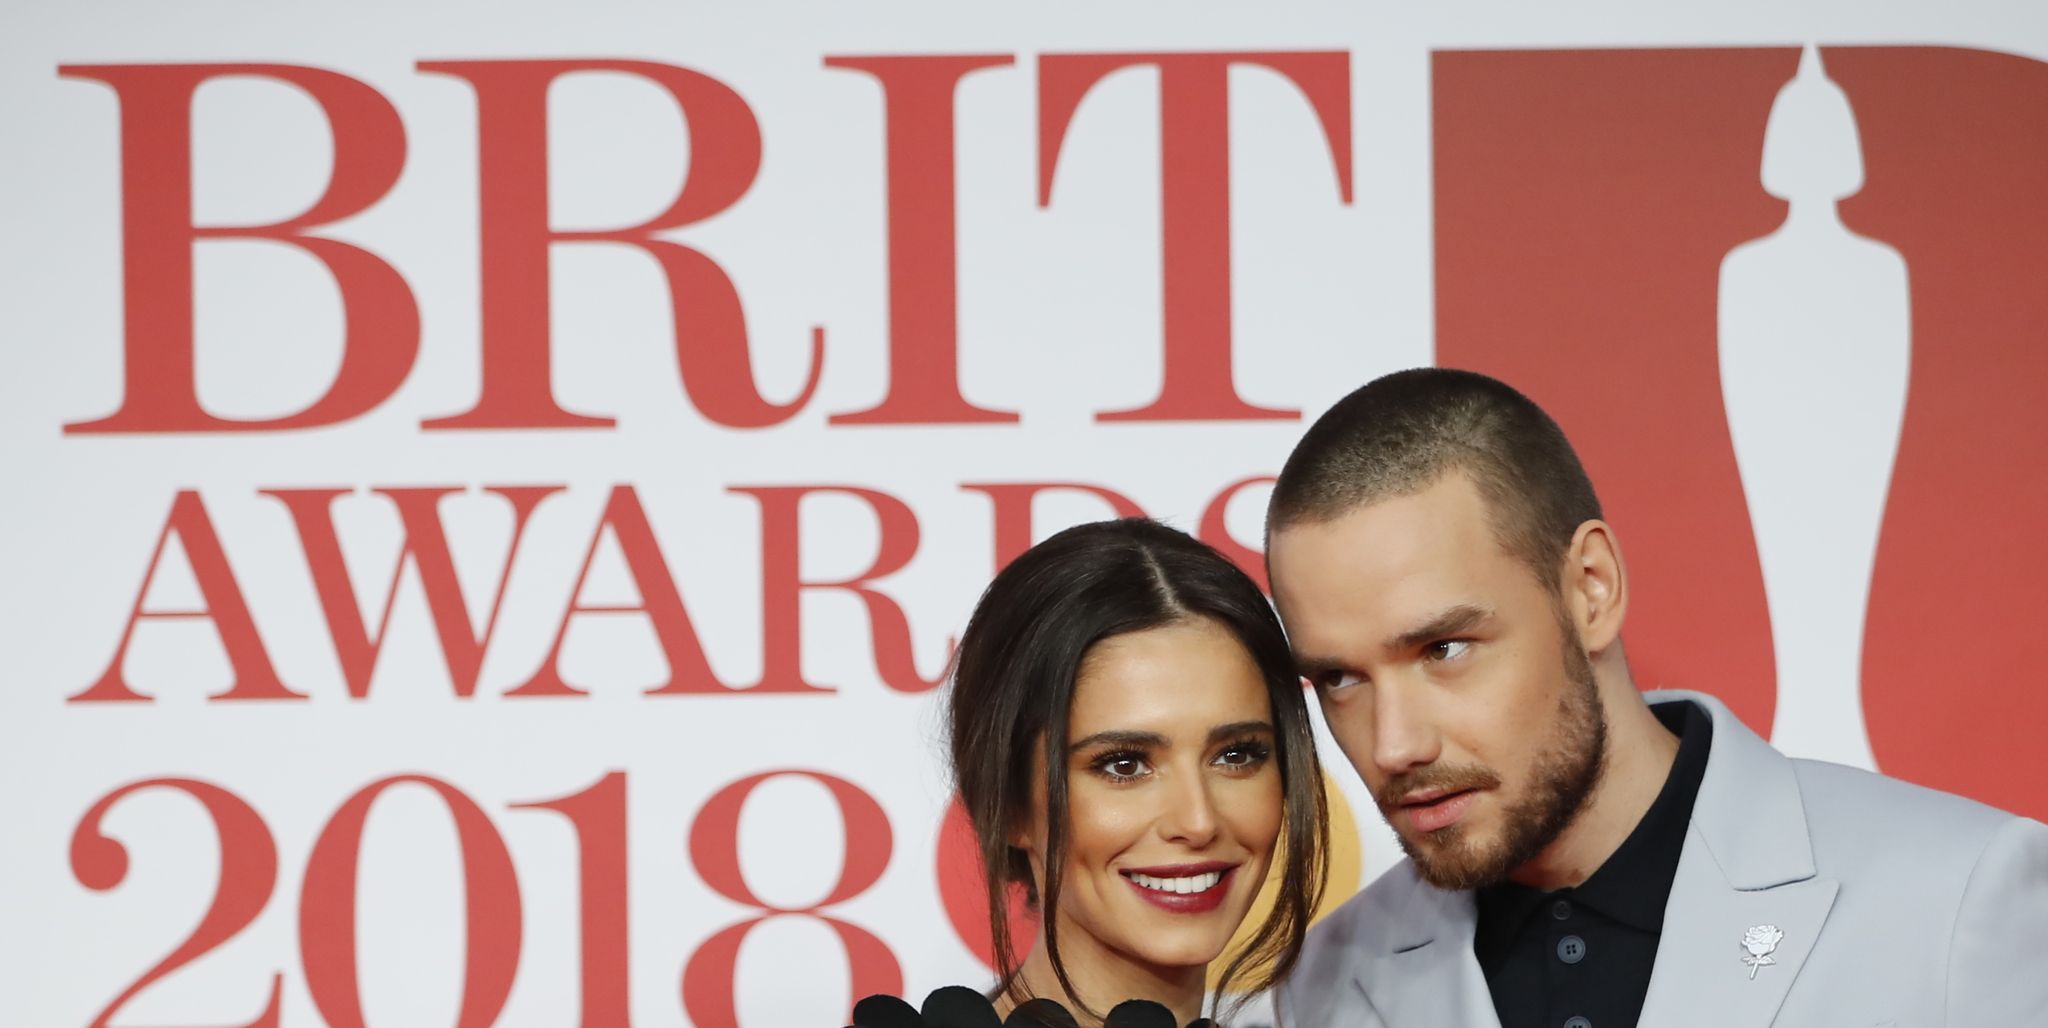 Liam Payne makes awkward joke about trading Cheryl in for a burger